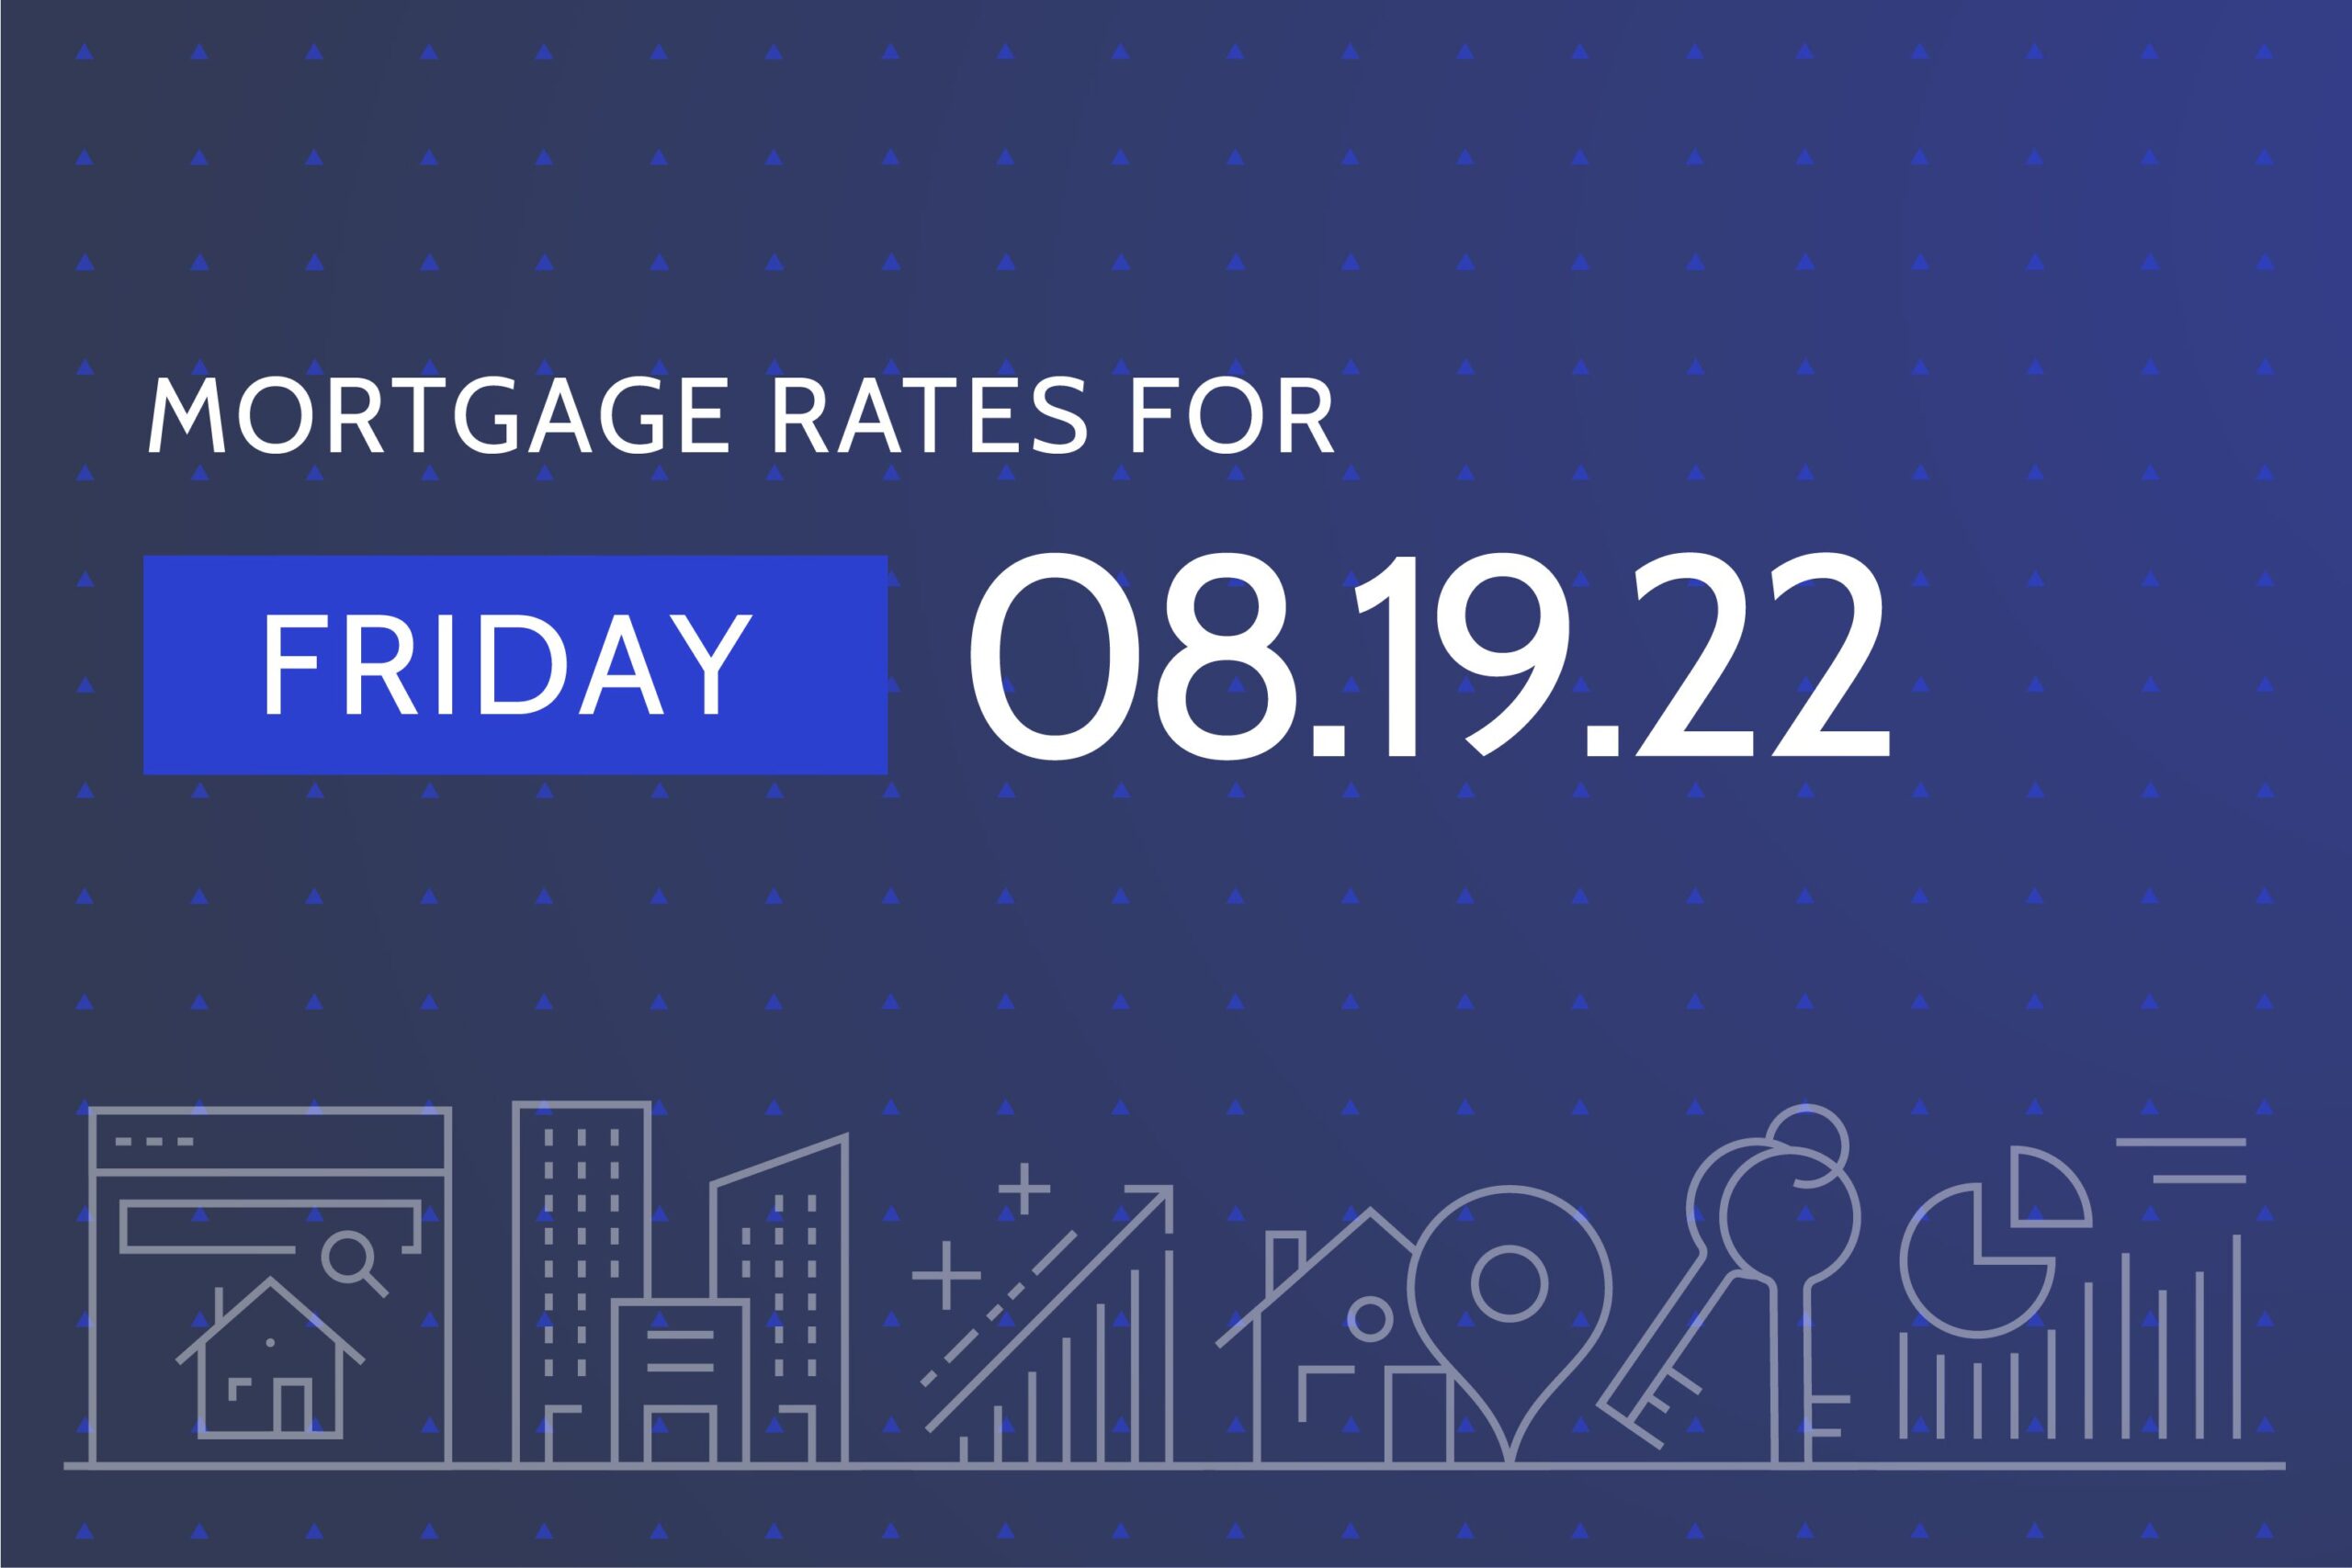 Today's Mortgage Rates & Trends